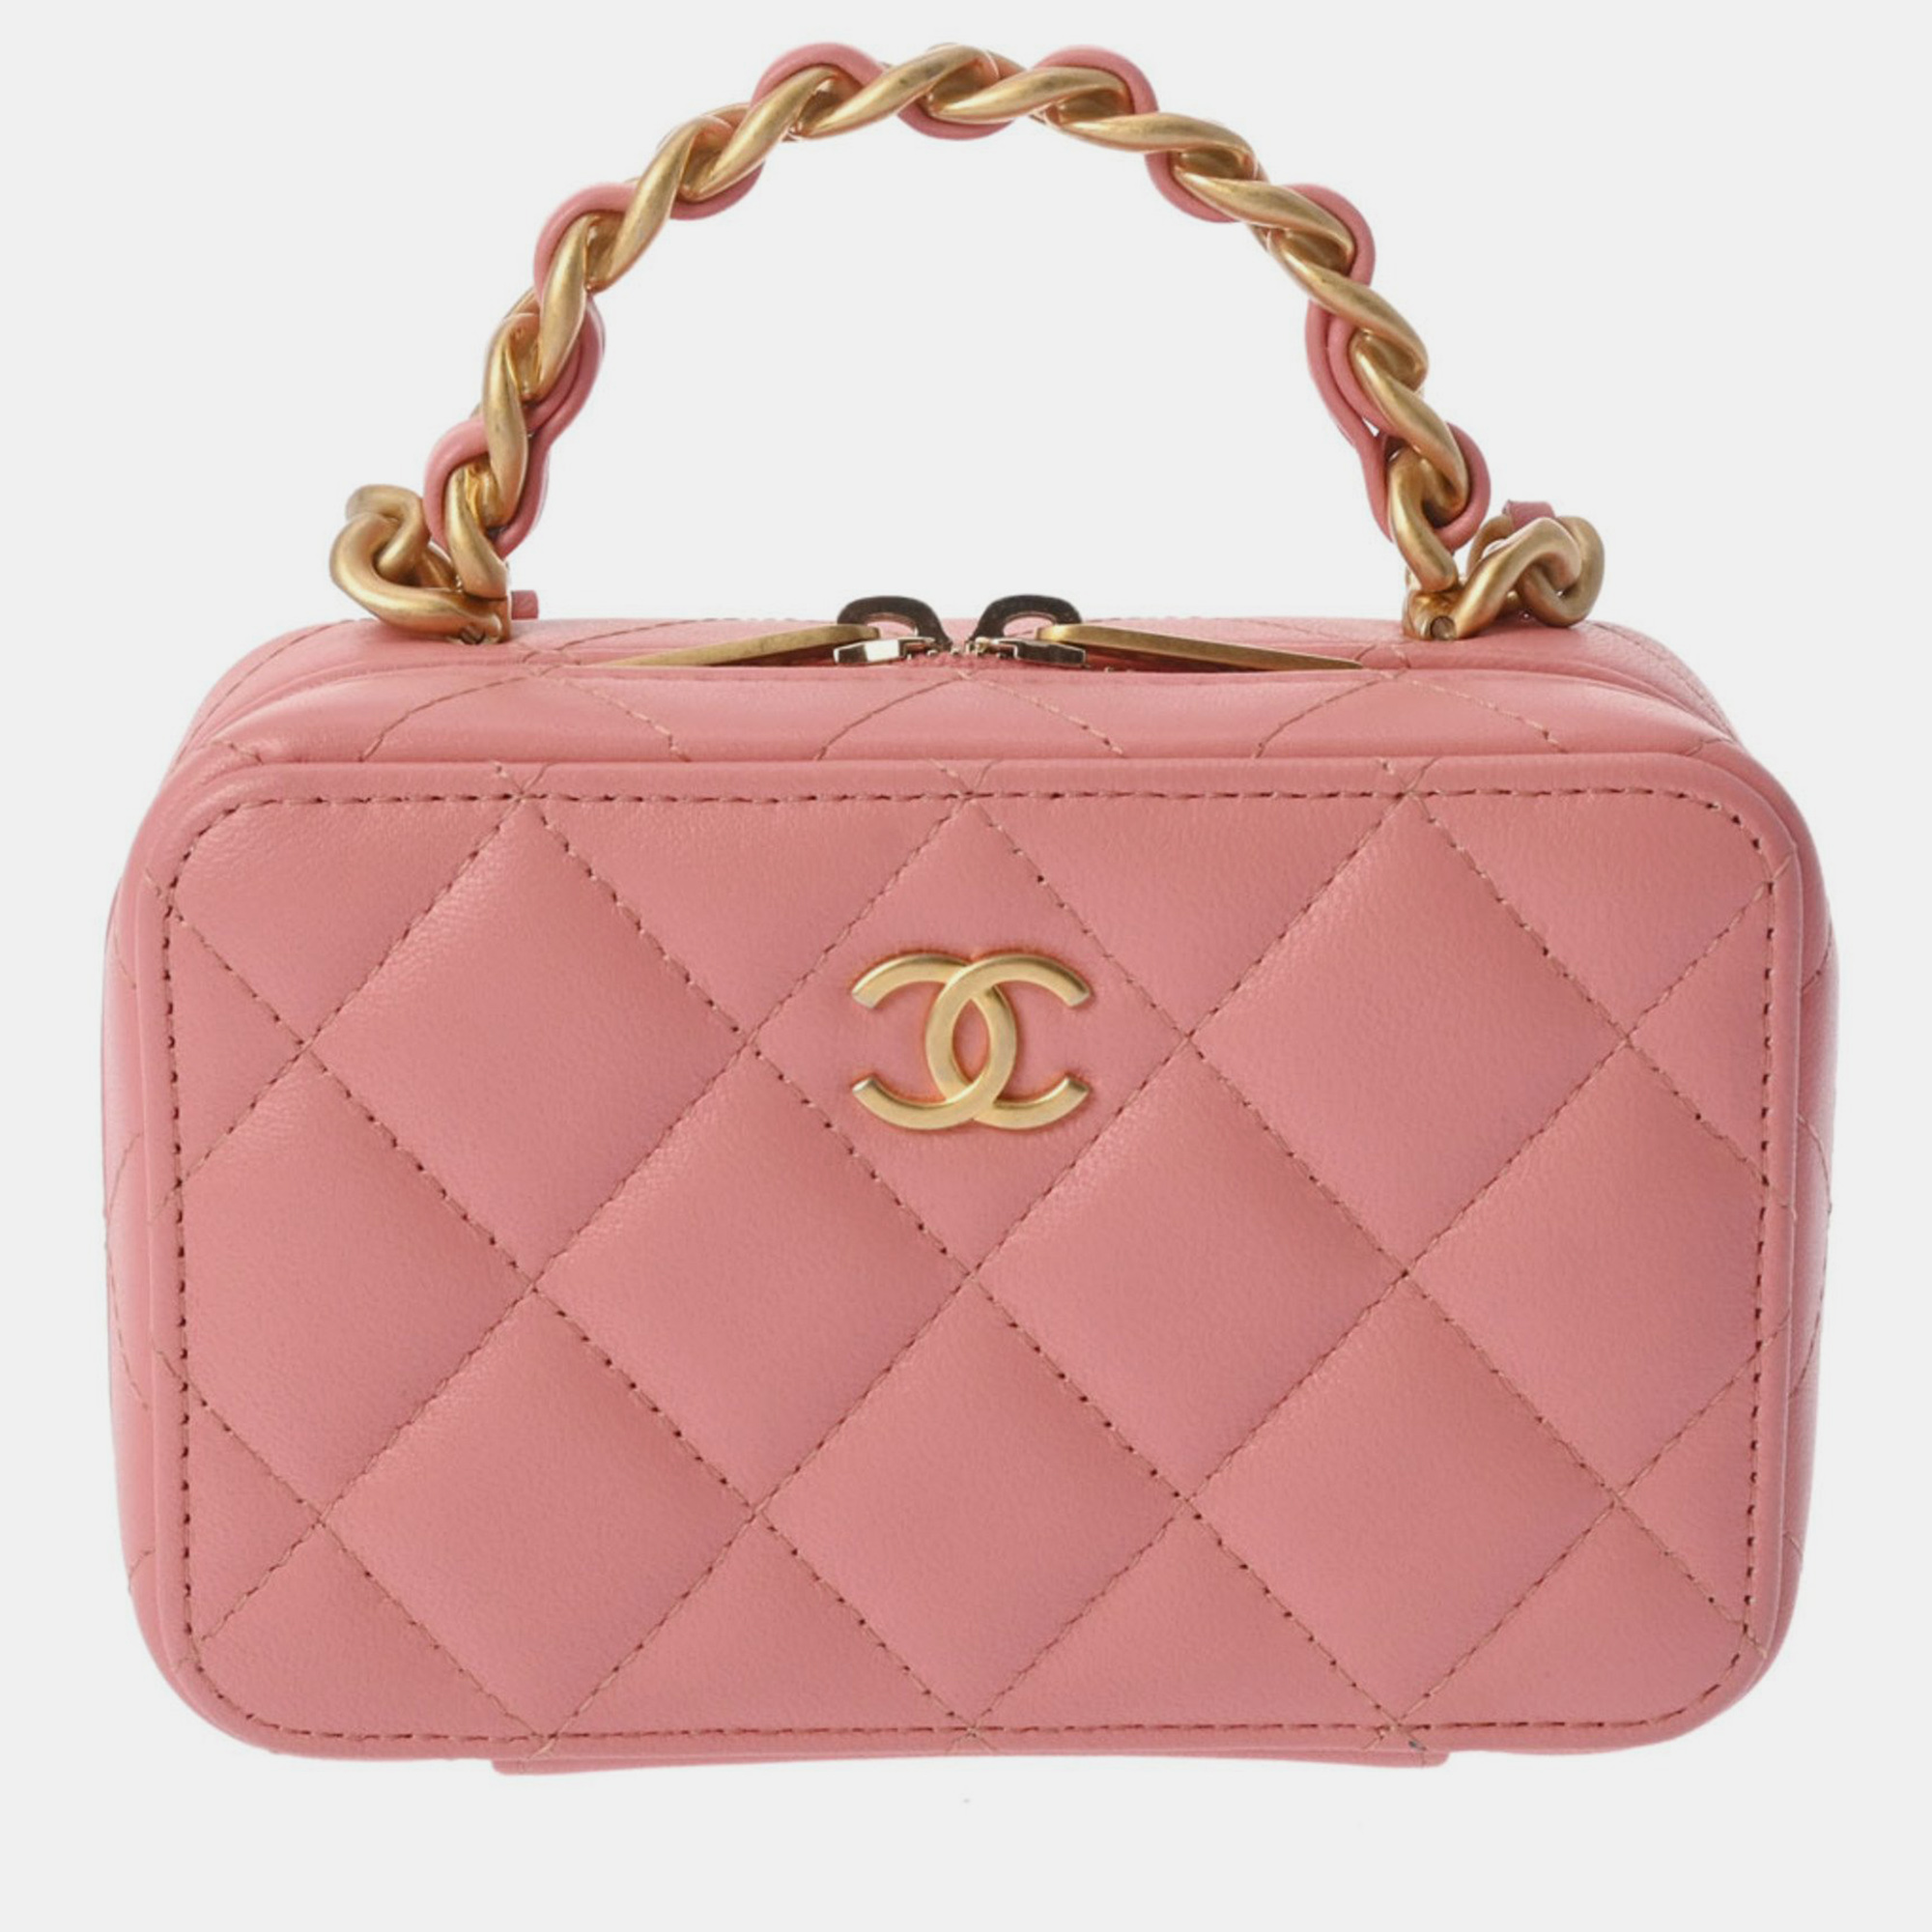 Chanel pink quilted lambskin top handle camera case bag